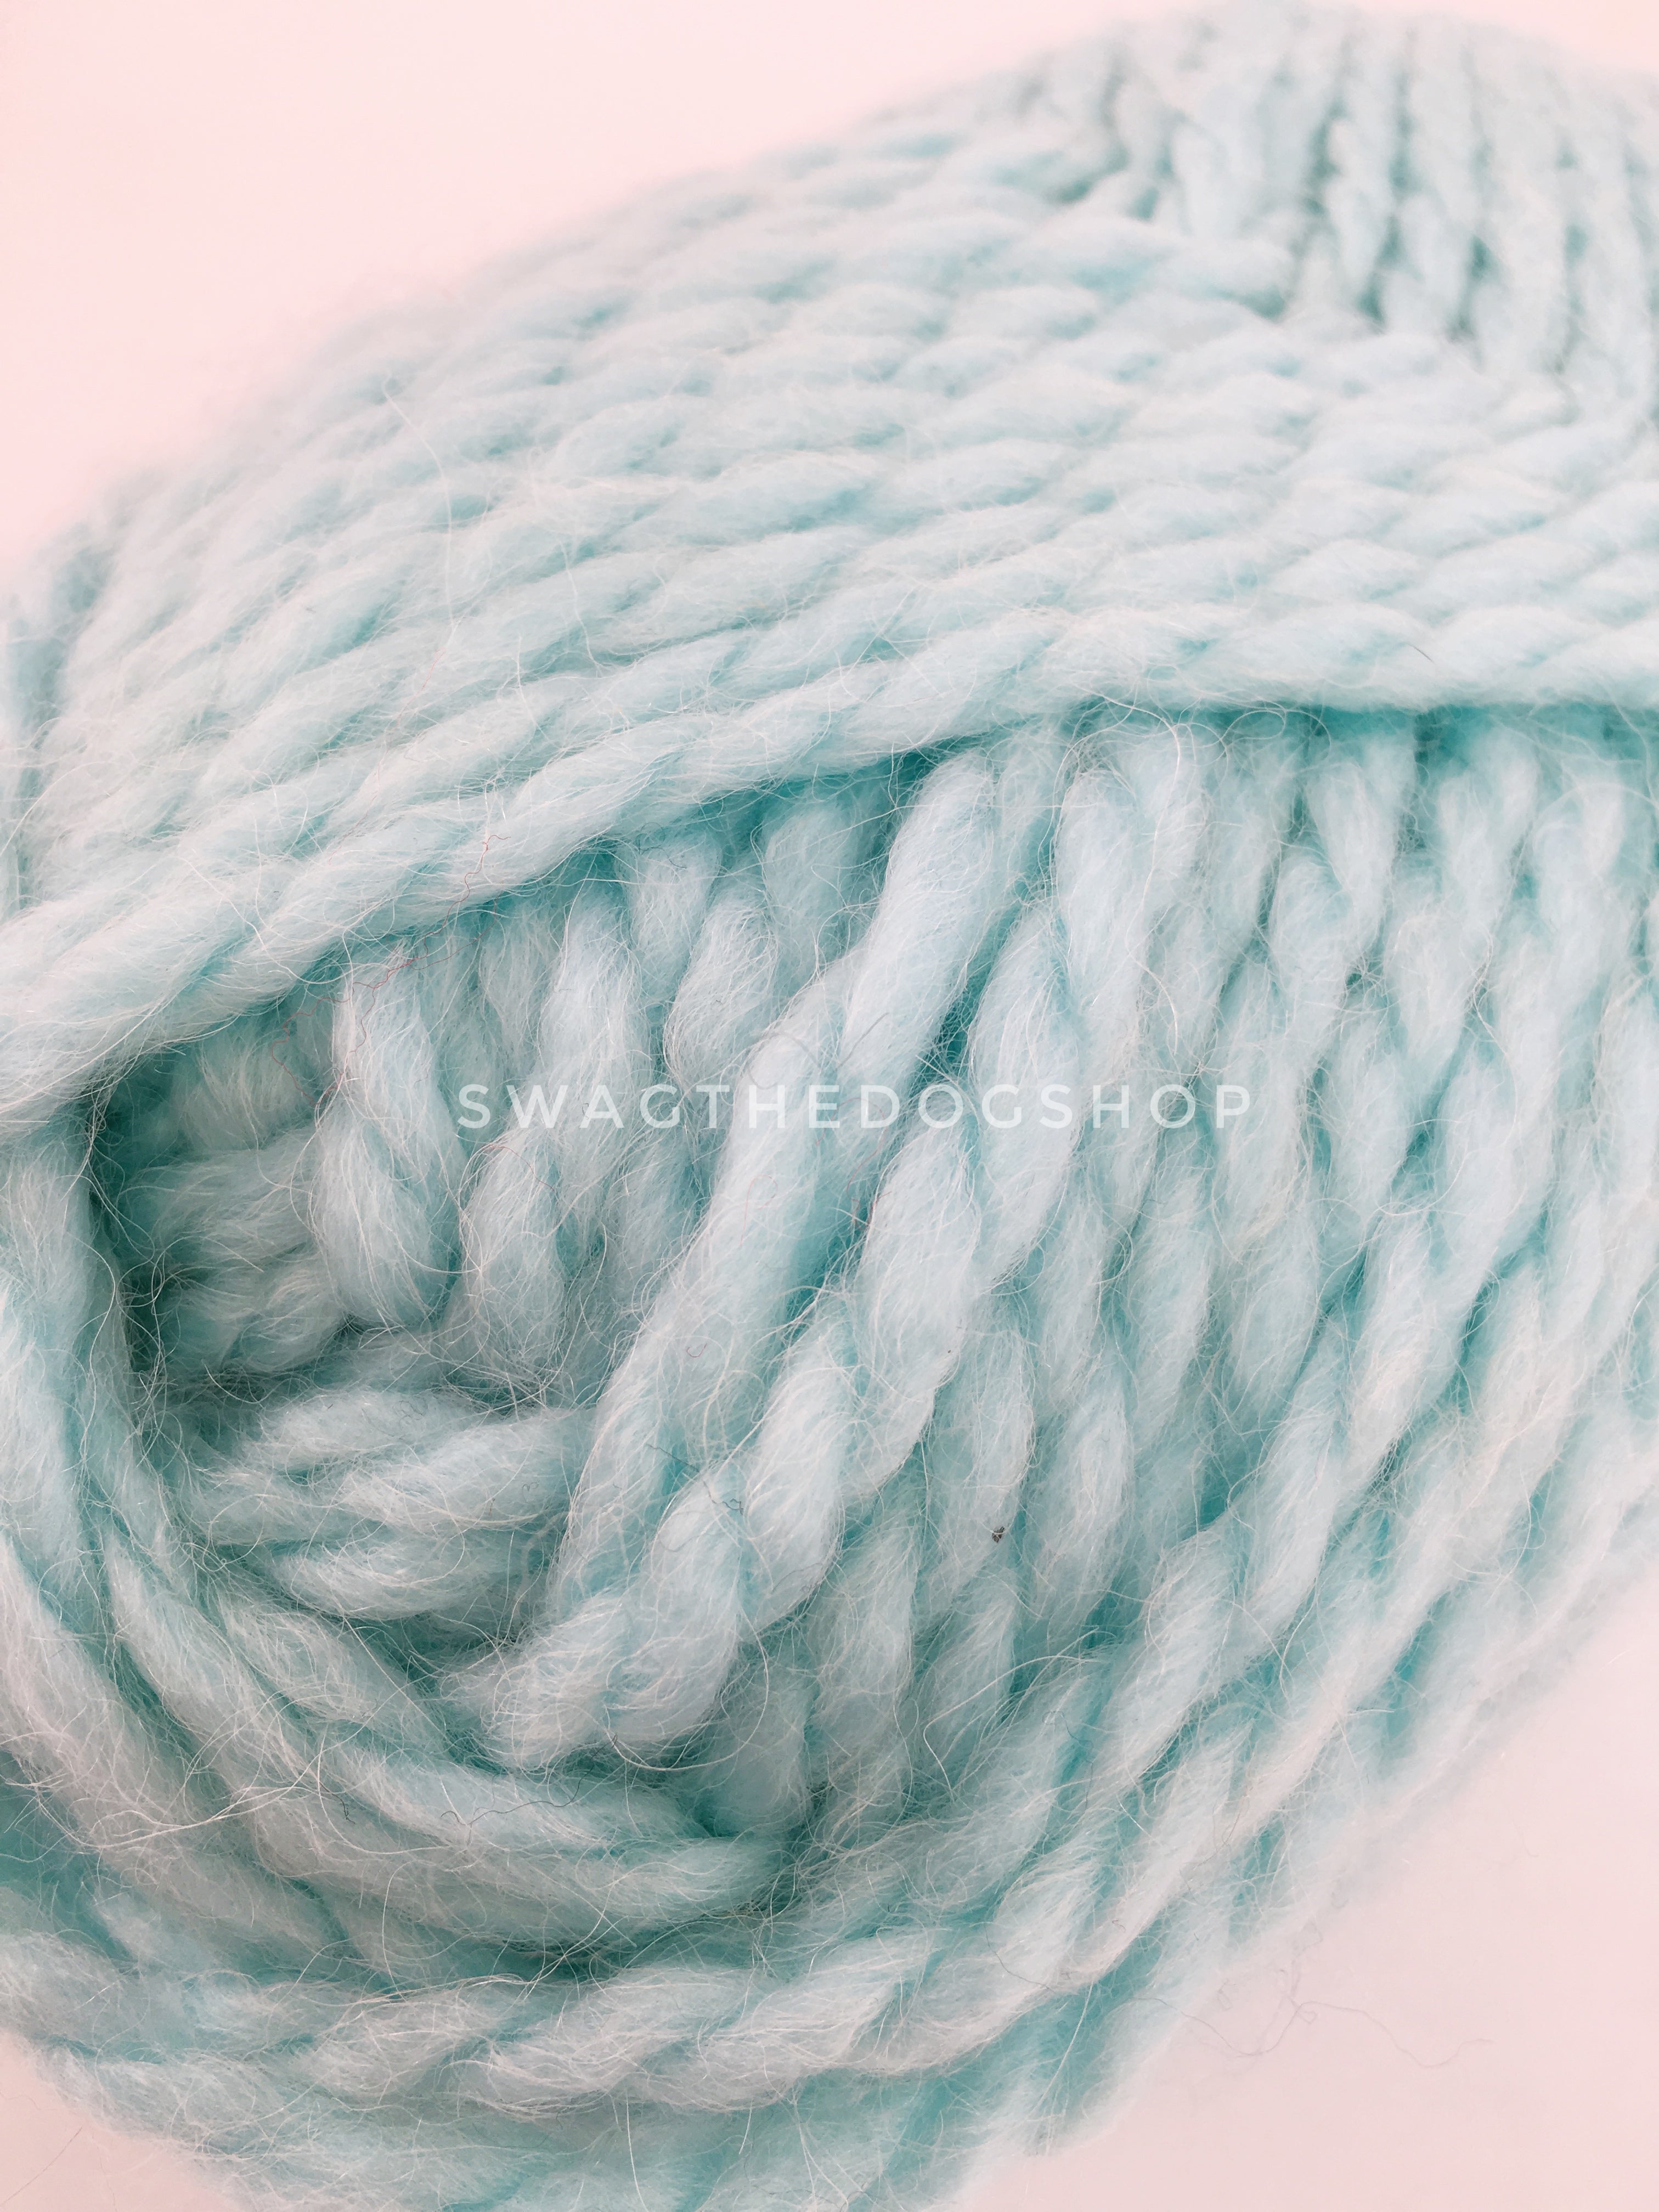 Turquoise Swagsnood - Close Up of Yarn View. Turquoise Color Alpaca Yarn Dog Snood with Accent Button